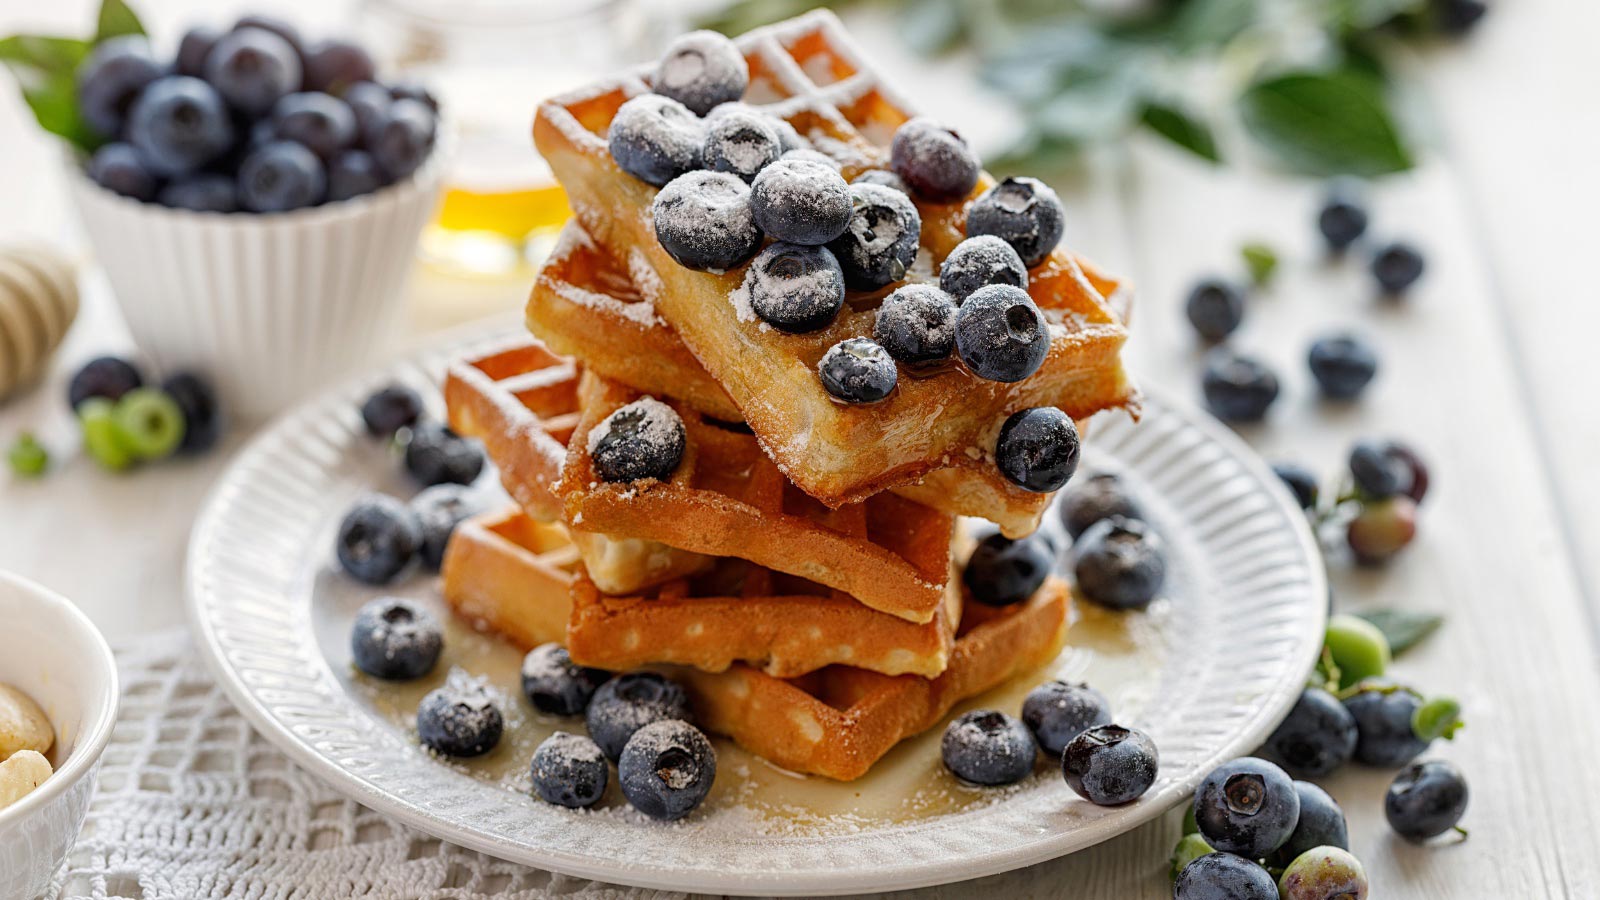 16 Crazy Delicious Breakfast Recipes You Shouldn’t Miss Out On